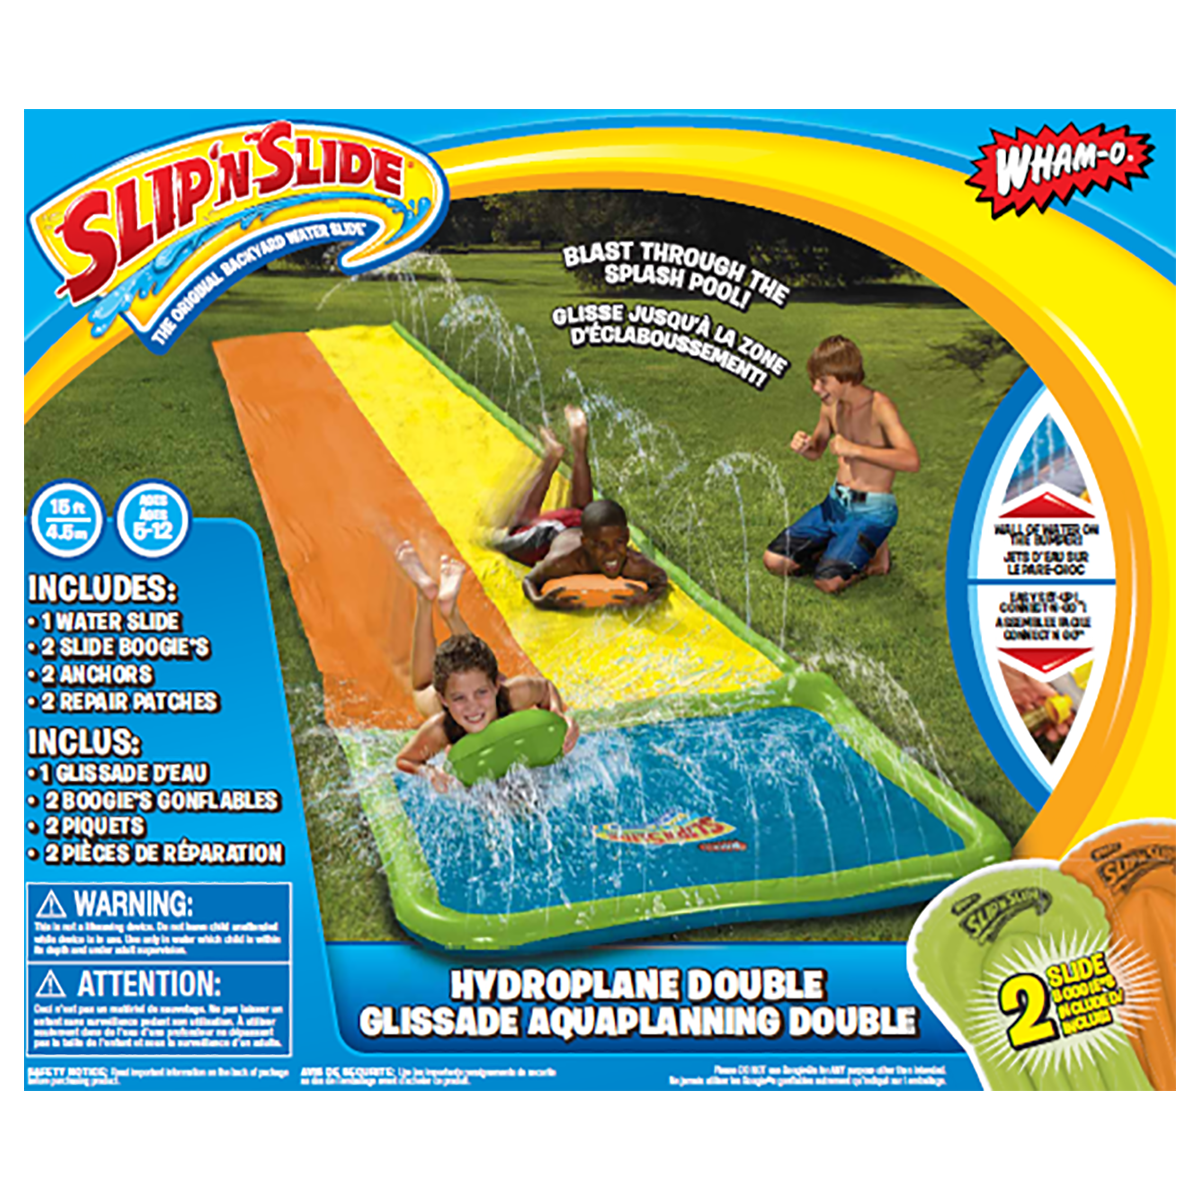 Wham-O Extra Large Water Slide 790cm Slip N Slide With Inflatable Boards 26 x4ft 